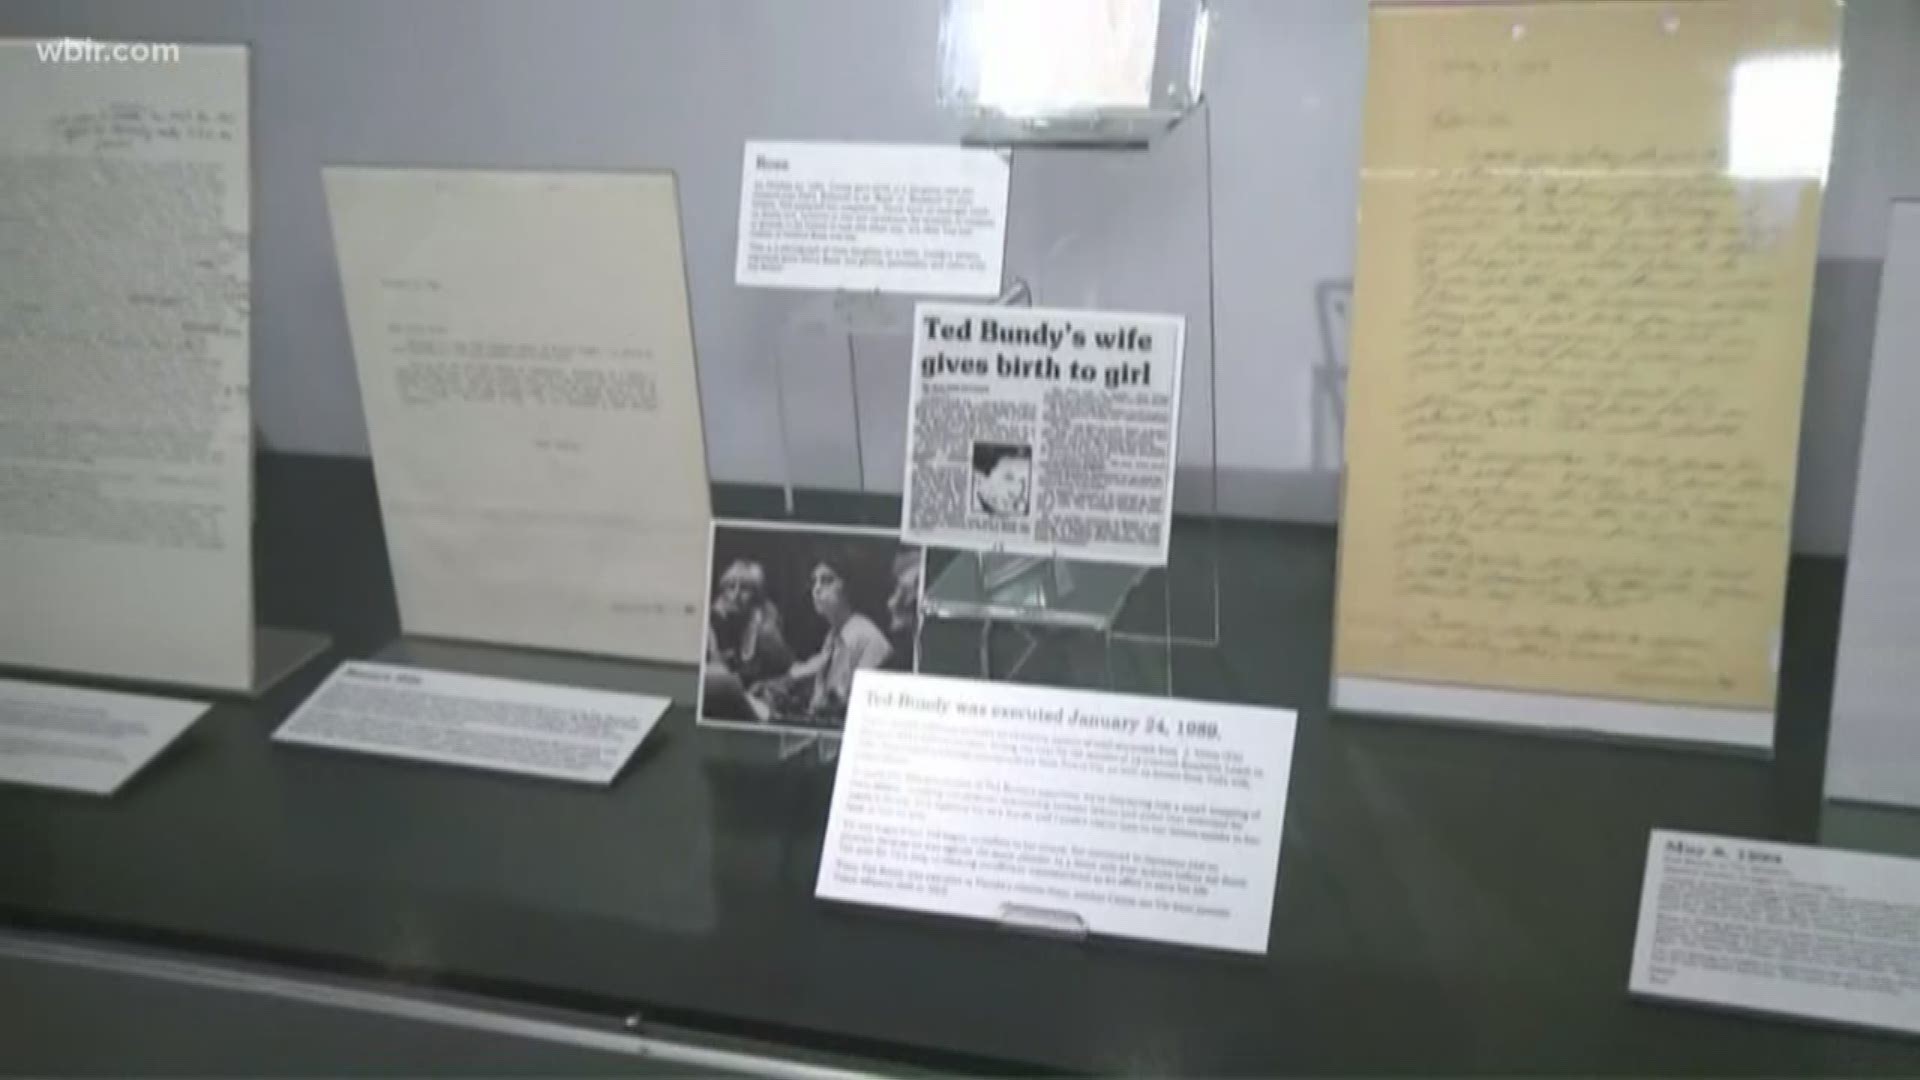 An exhibit at Alcatraz East Crime Museum is marking the execution of serial killer Ted Bundy. 
He's known as one of the most infamous serial killers of the 20th century.